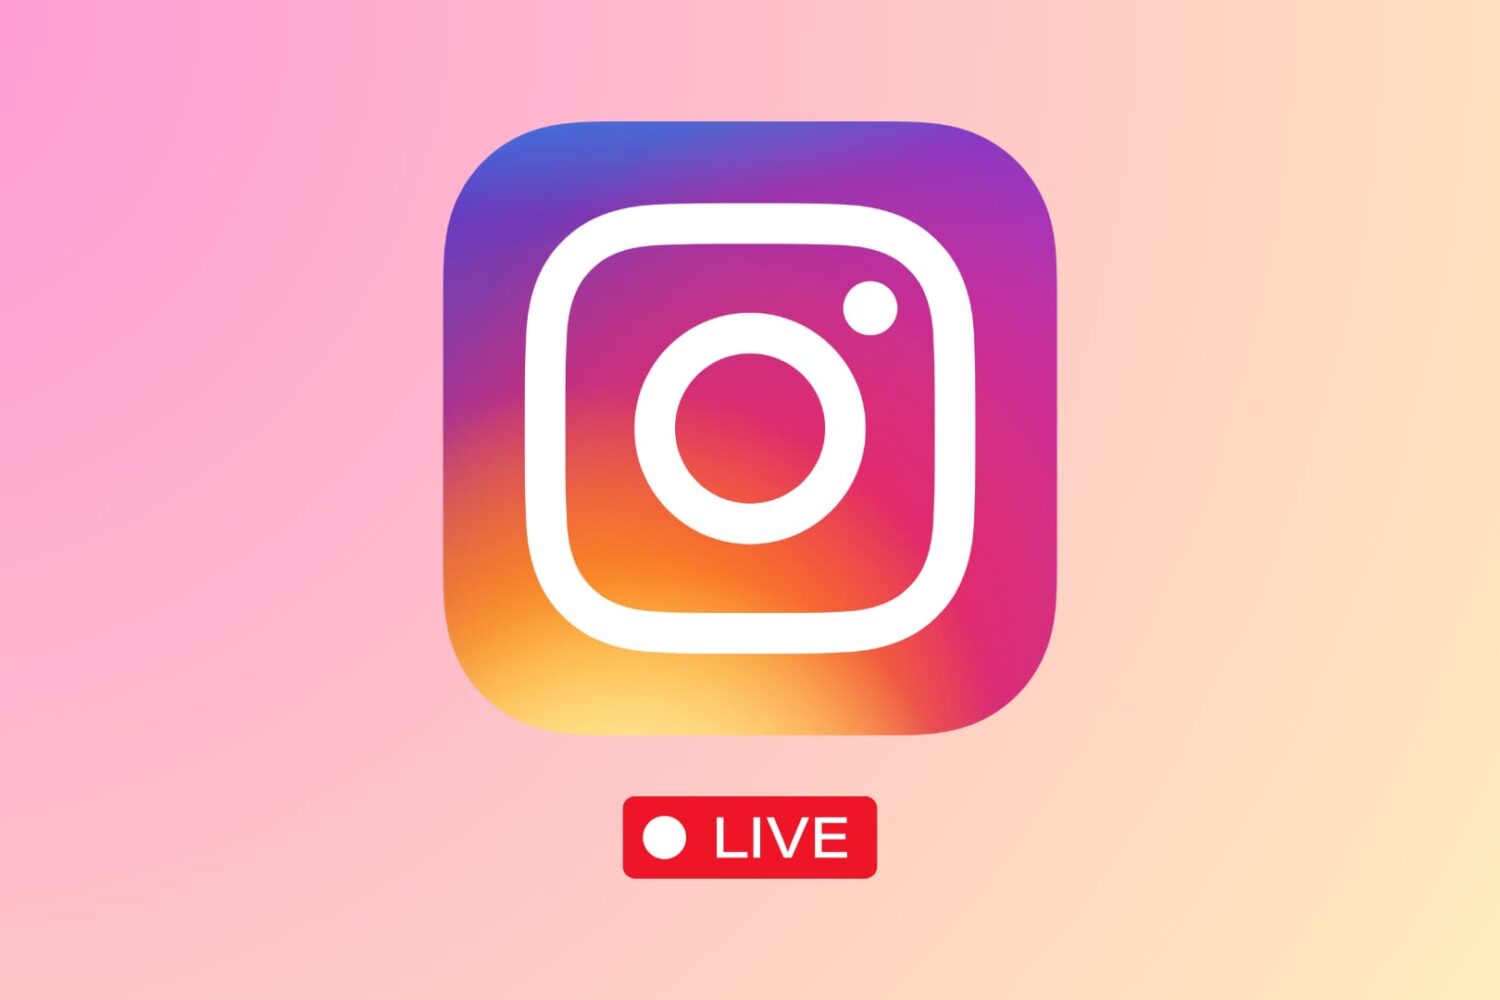 Instagram app icon with a Live icon under it